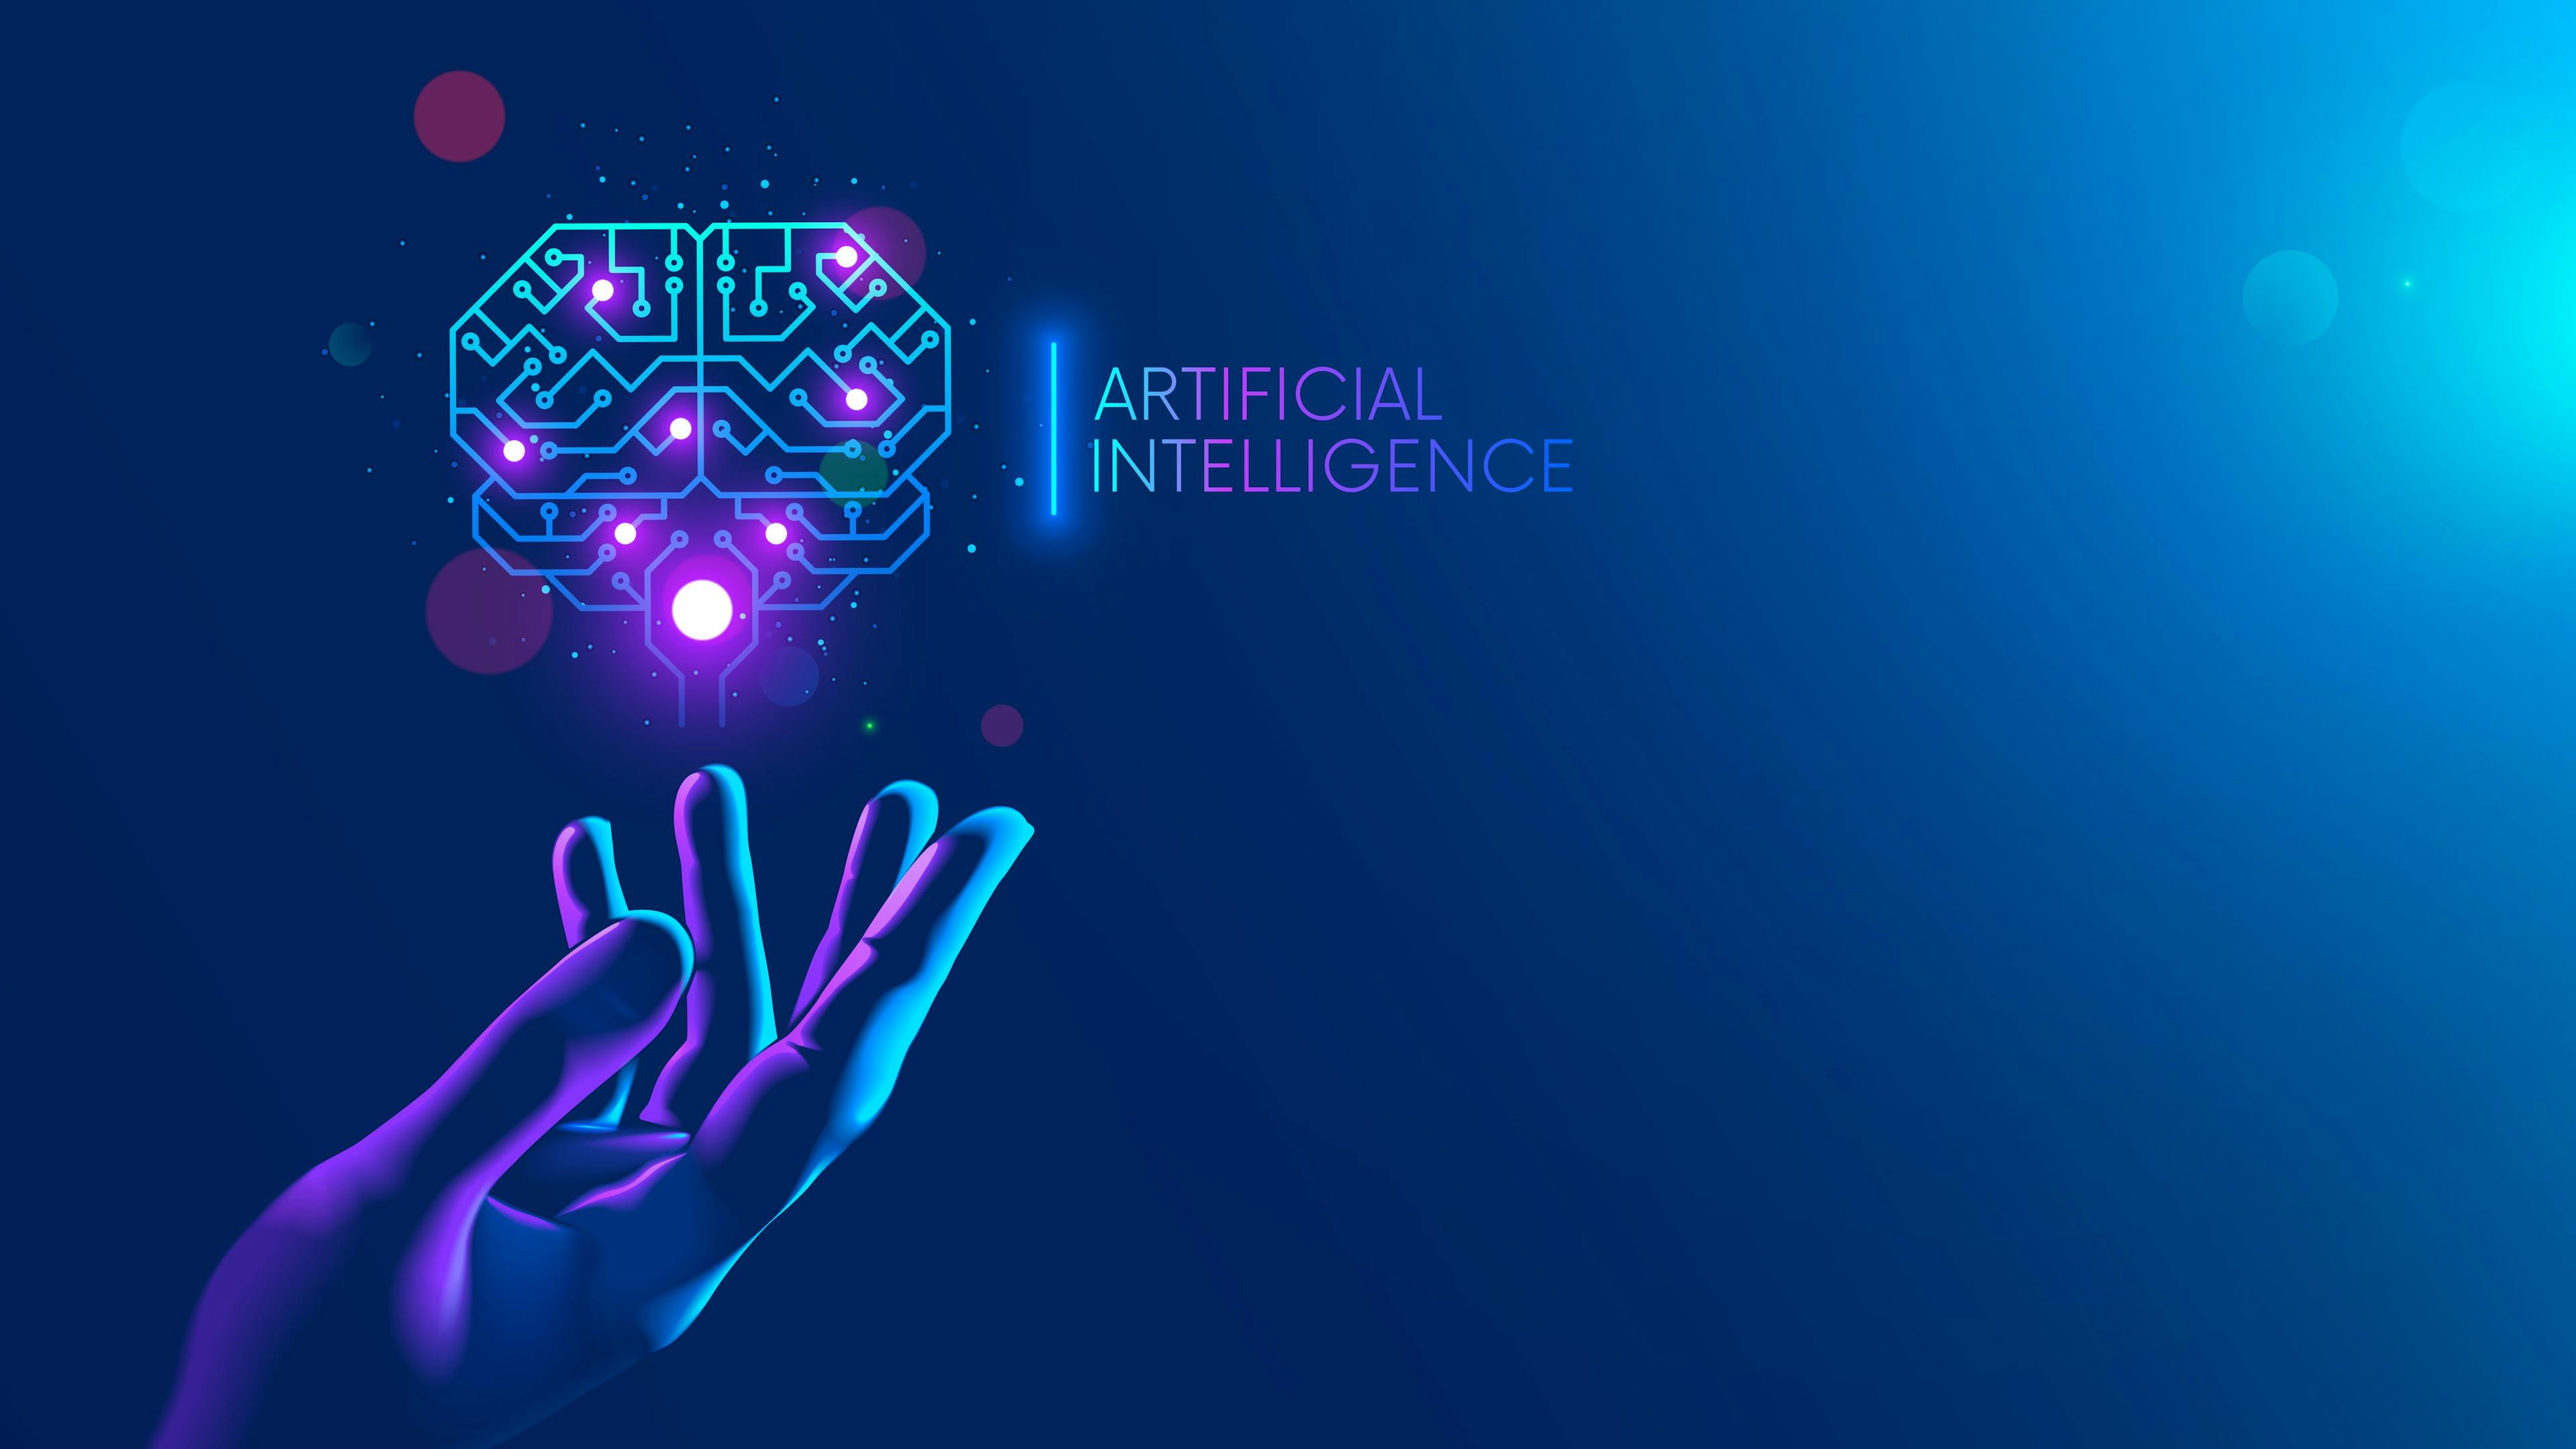 Image credit: AndSus | stock.adobe.com. Circuit board in shape electronic brain with gyrus, symbol ai hanging over hand. Symbol of computer neural networks or artificial intelligence in neon cyberspace with glowing title on palm scientist